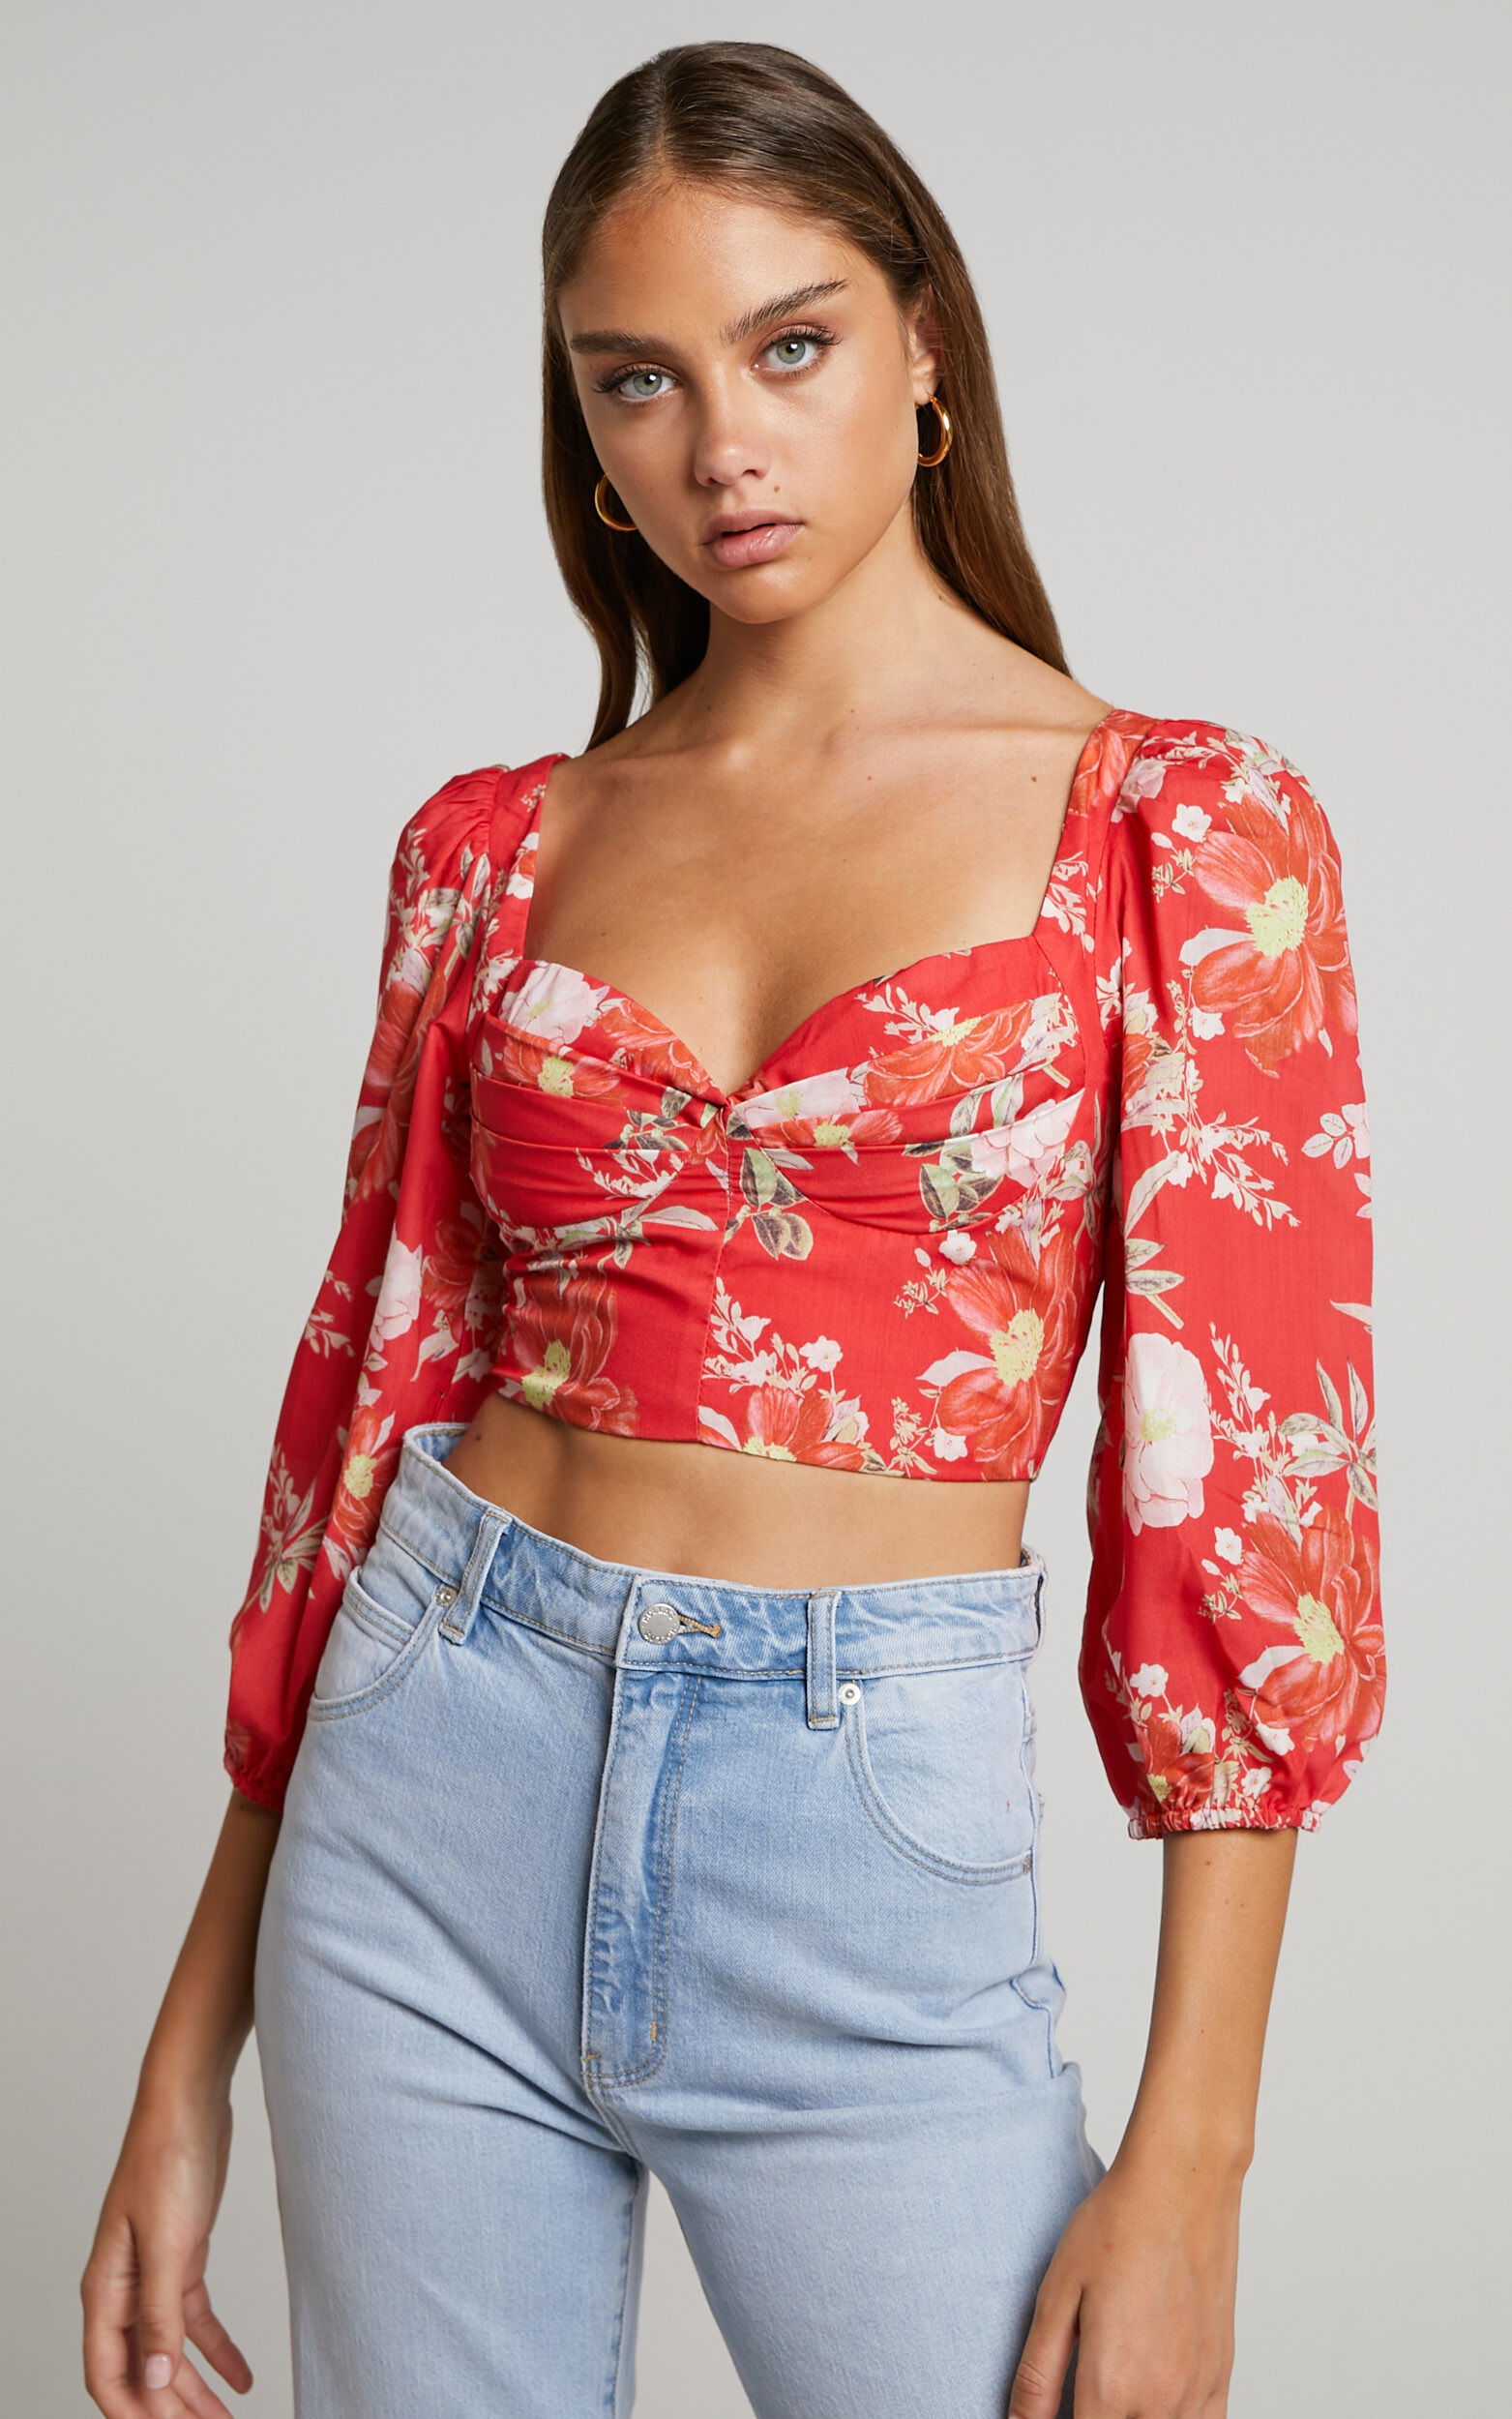 Viveca Top - Pleated Bust Balloon Sleeve Cropped Top in Rosie Floral - 06, RED1, super-hi-res image number null